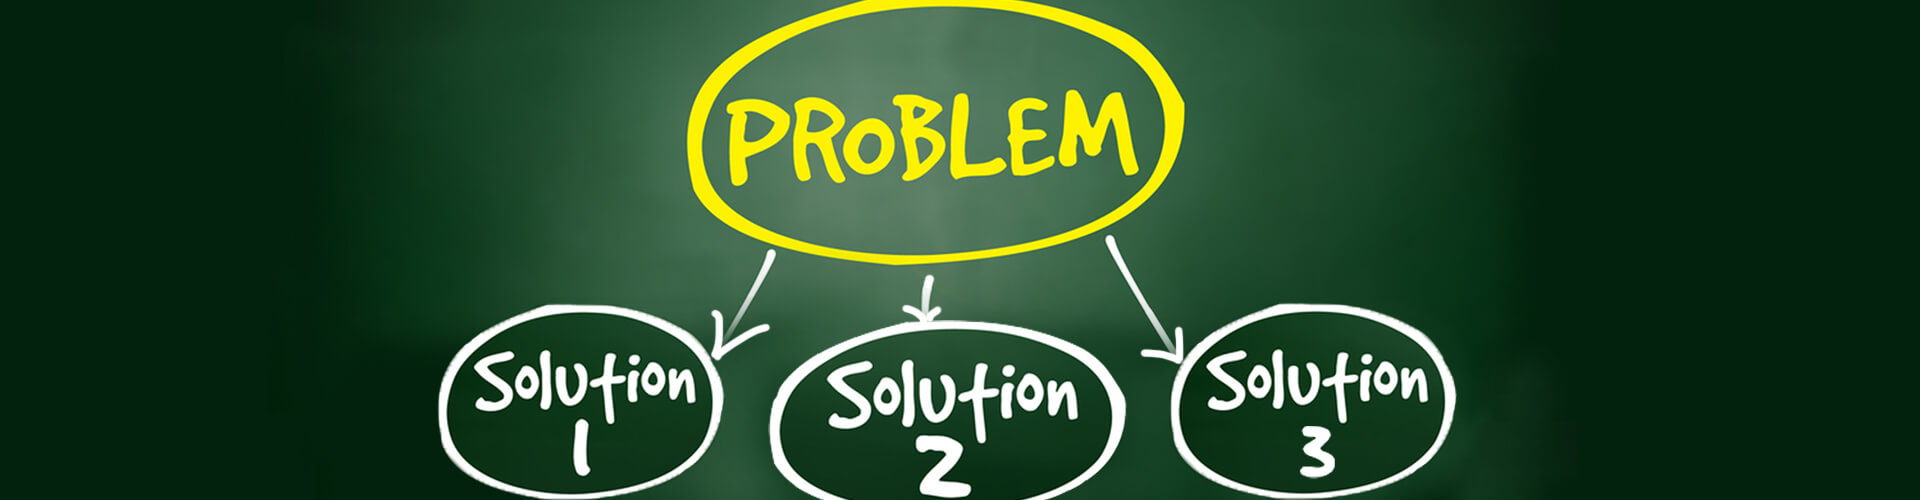 why following the 6 steps of problem solving process is important